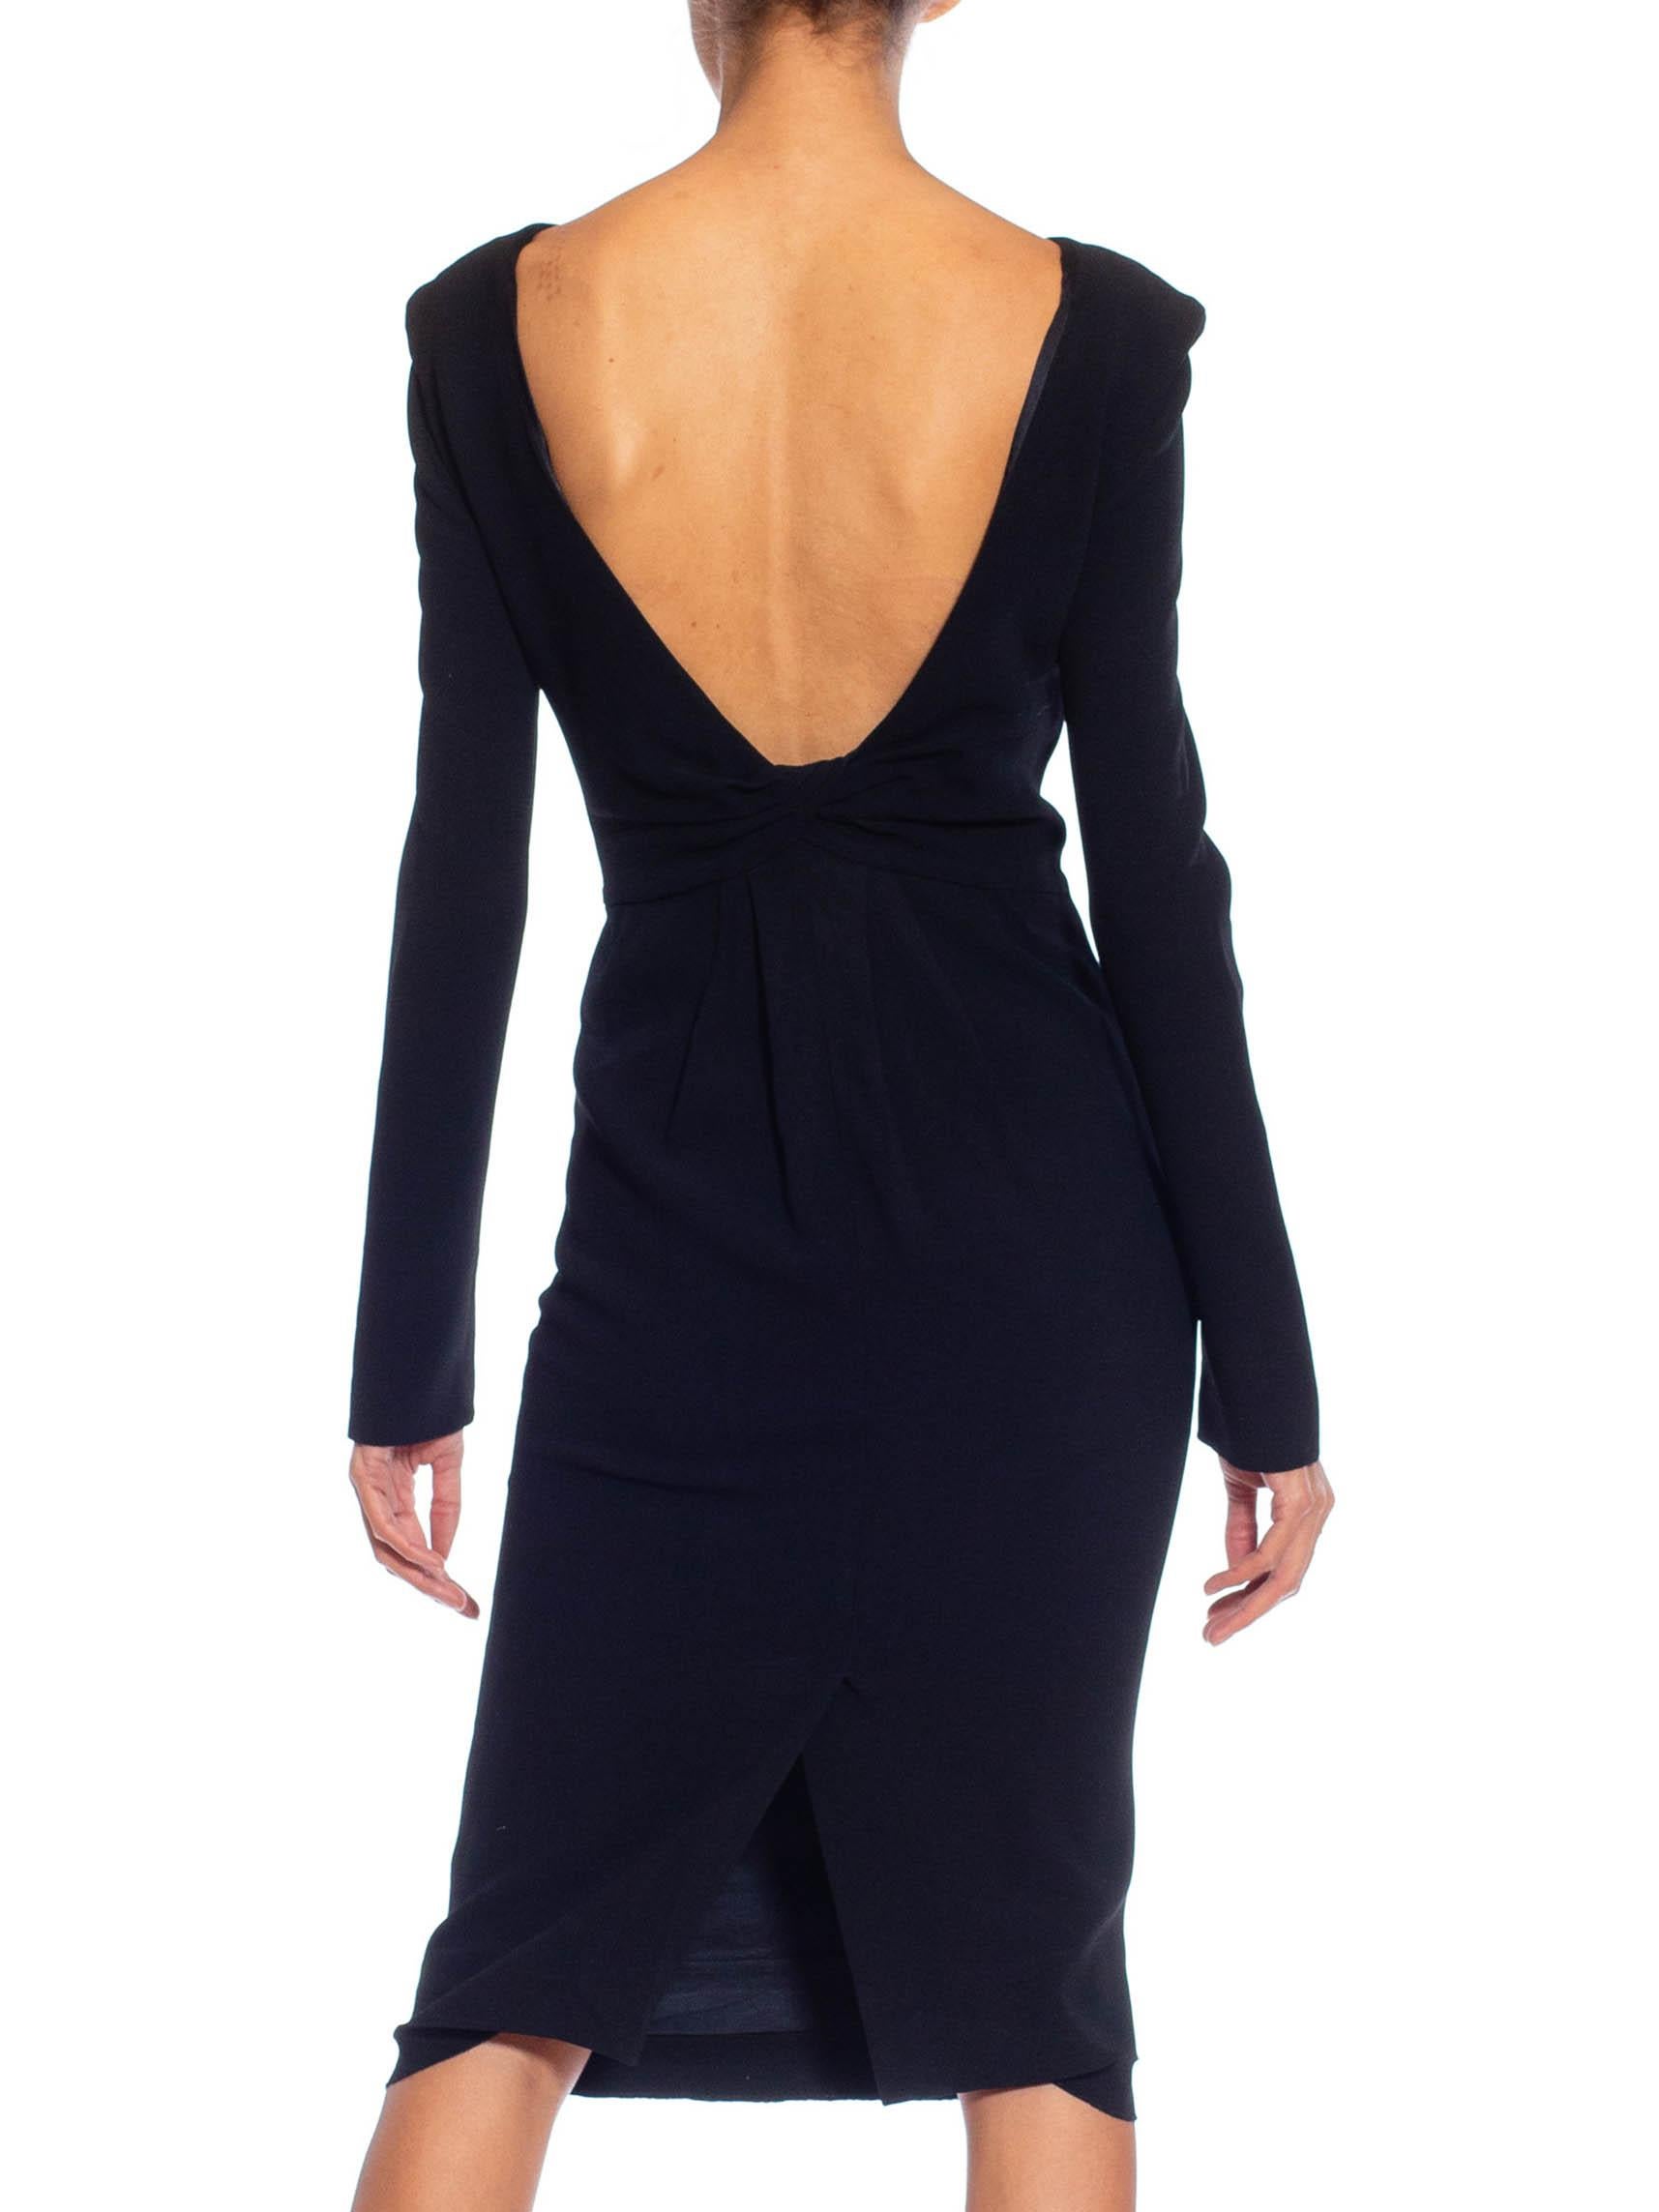 2000S TOM FORD Black Viscose Blend Long Sleeve Backless Dress With Padded Shoul For Sale 2